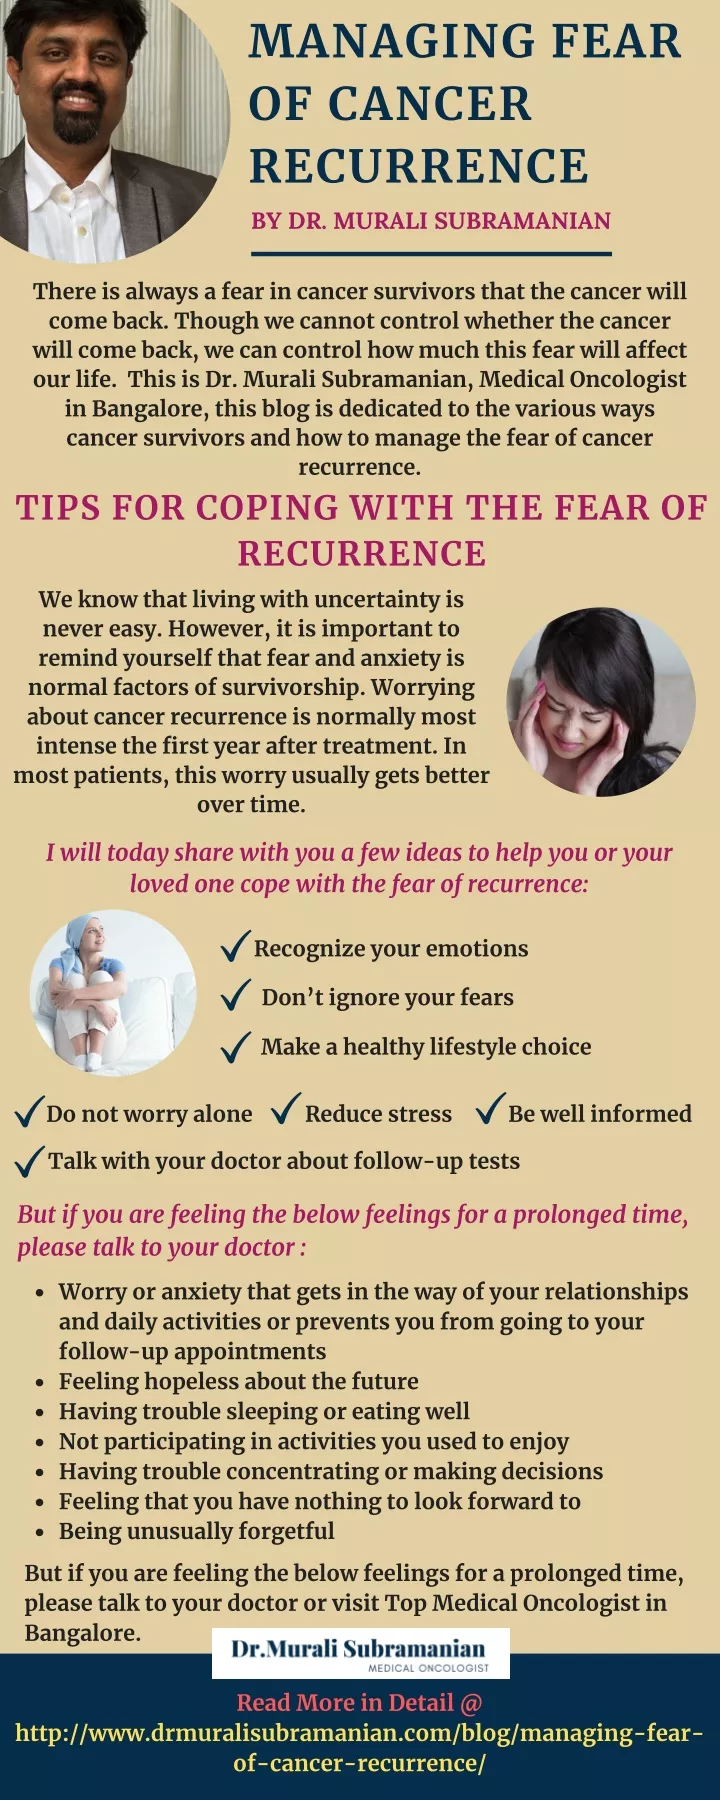 managing fear of cancer recurrence by dr murali